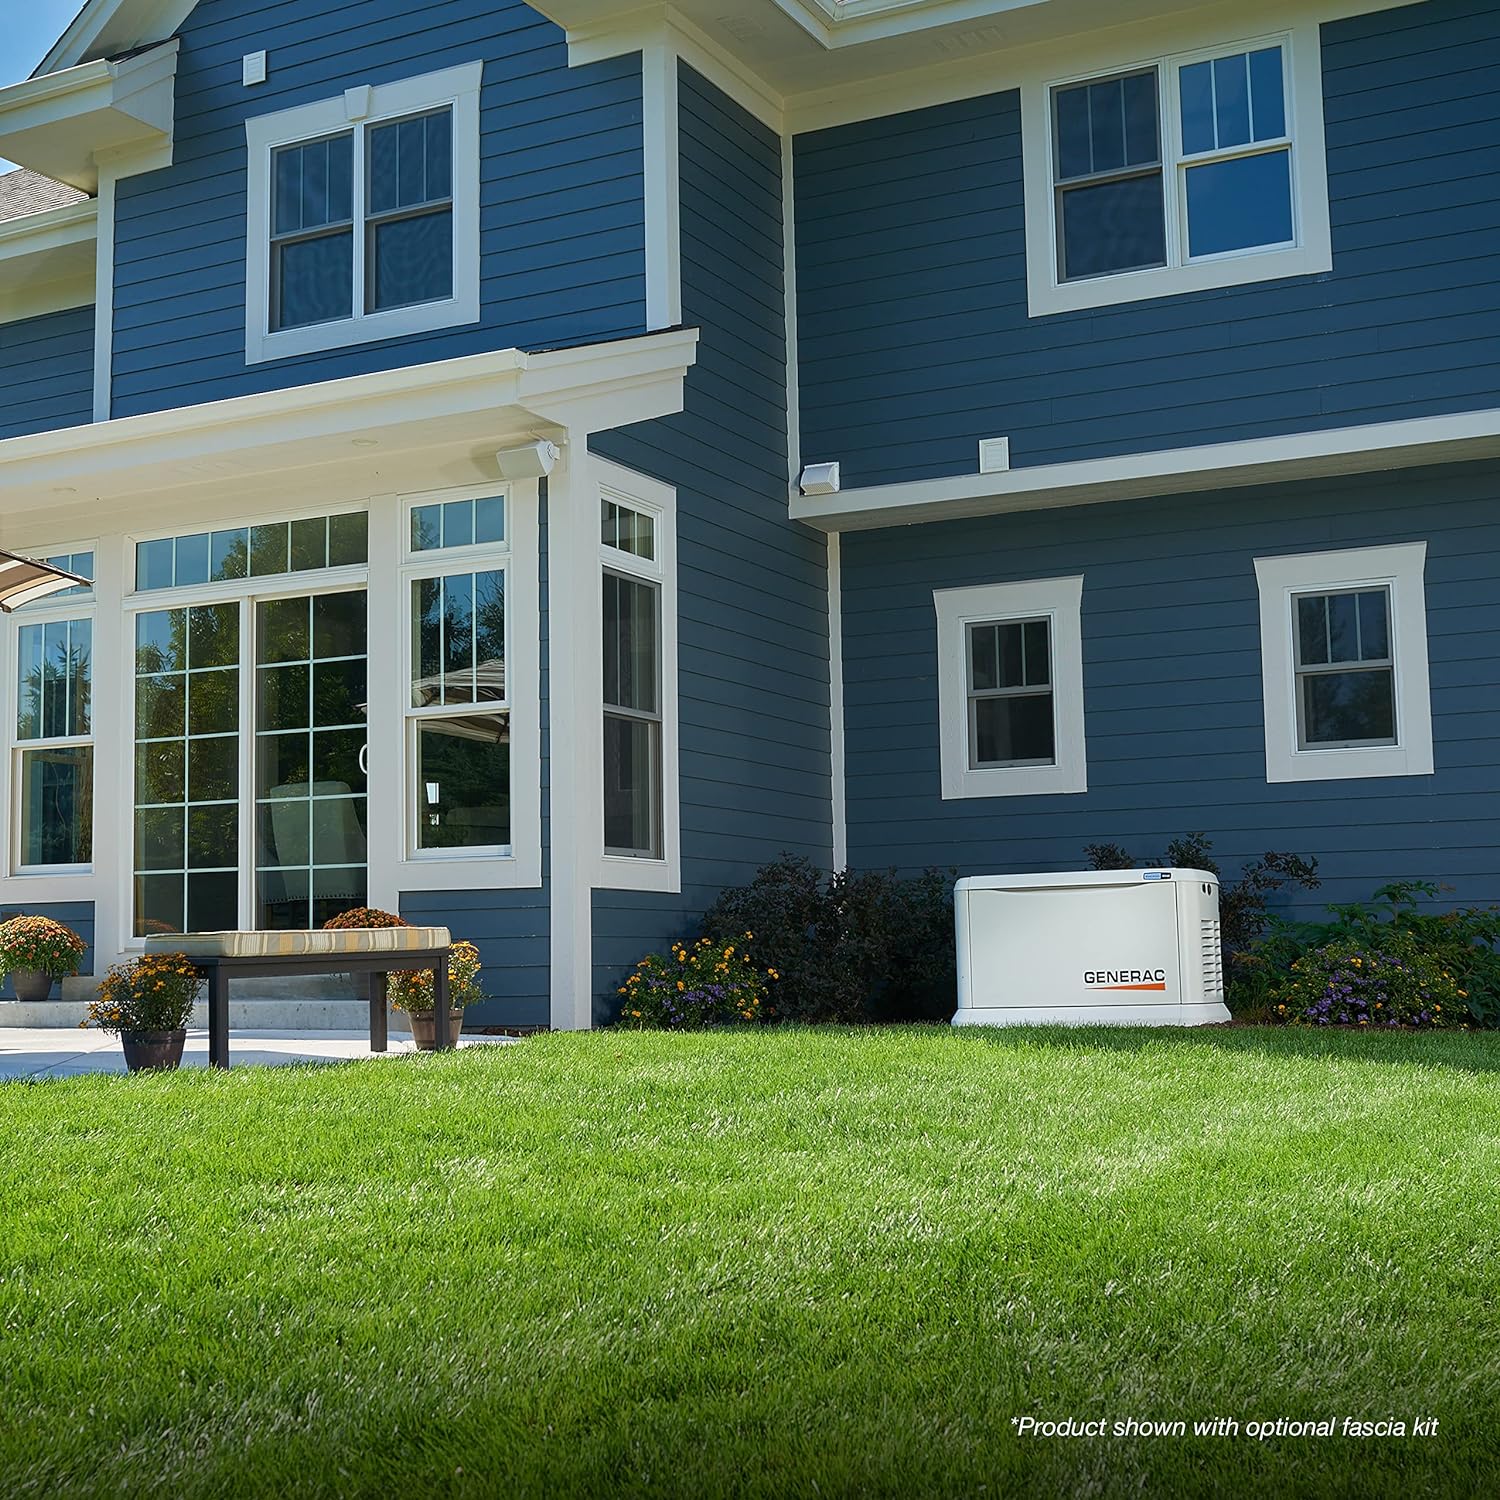 Generac 7172 Guardian Series: The Ultimate 10kW Home Standby Generator for Uninterrupted Power and Smart Connectivity